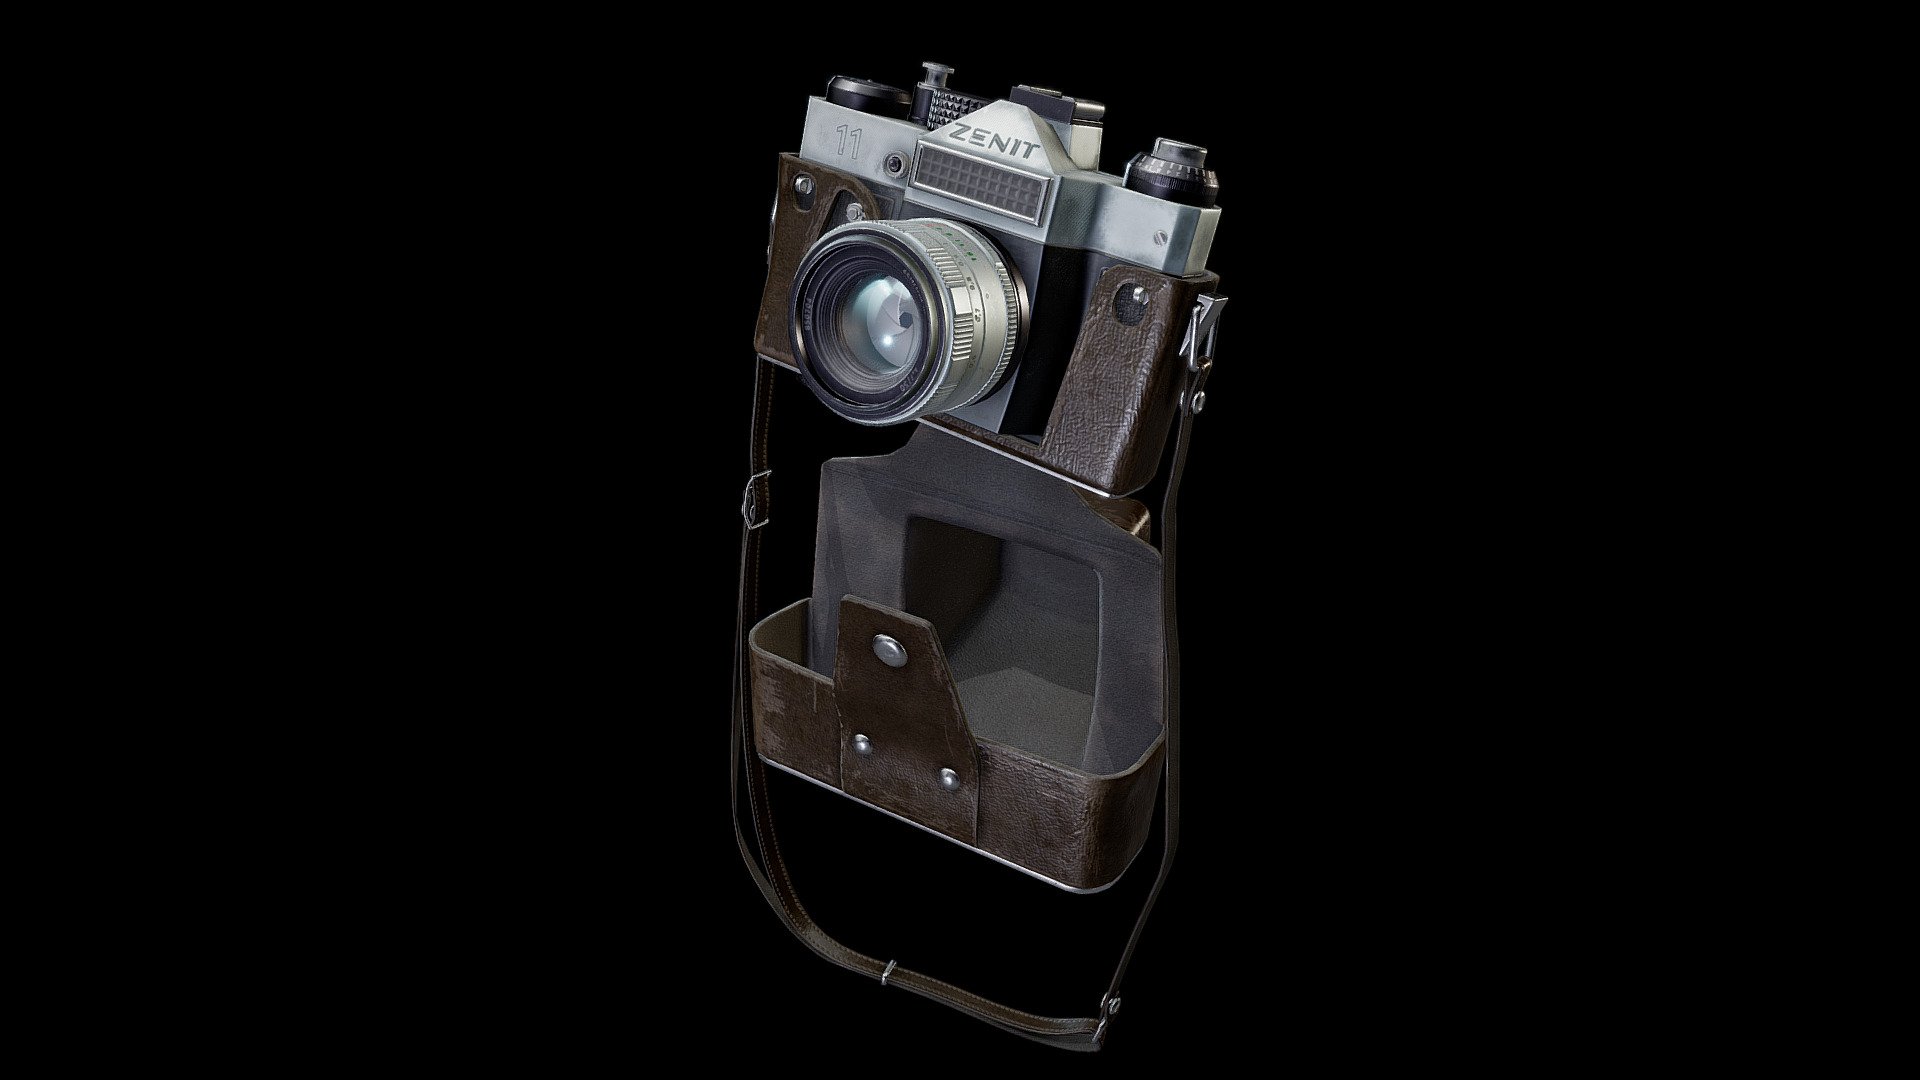 Old photocamera model.
Textures: PBR, 2 sets (camera, cover) 2048x2048

Made with Blender and Substance Painter 3d model